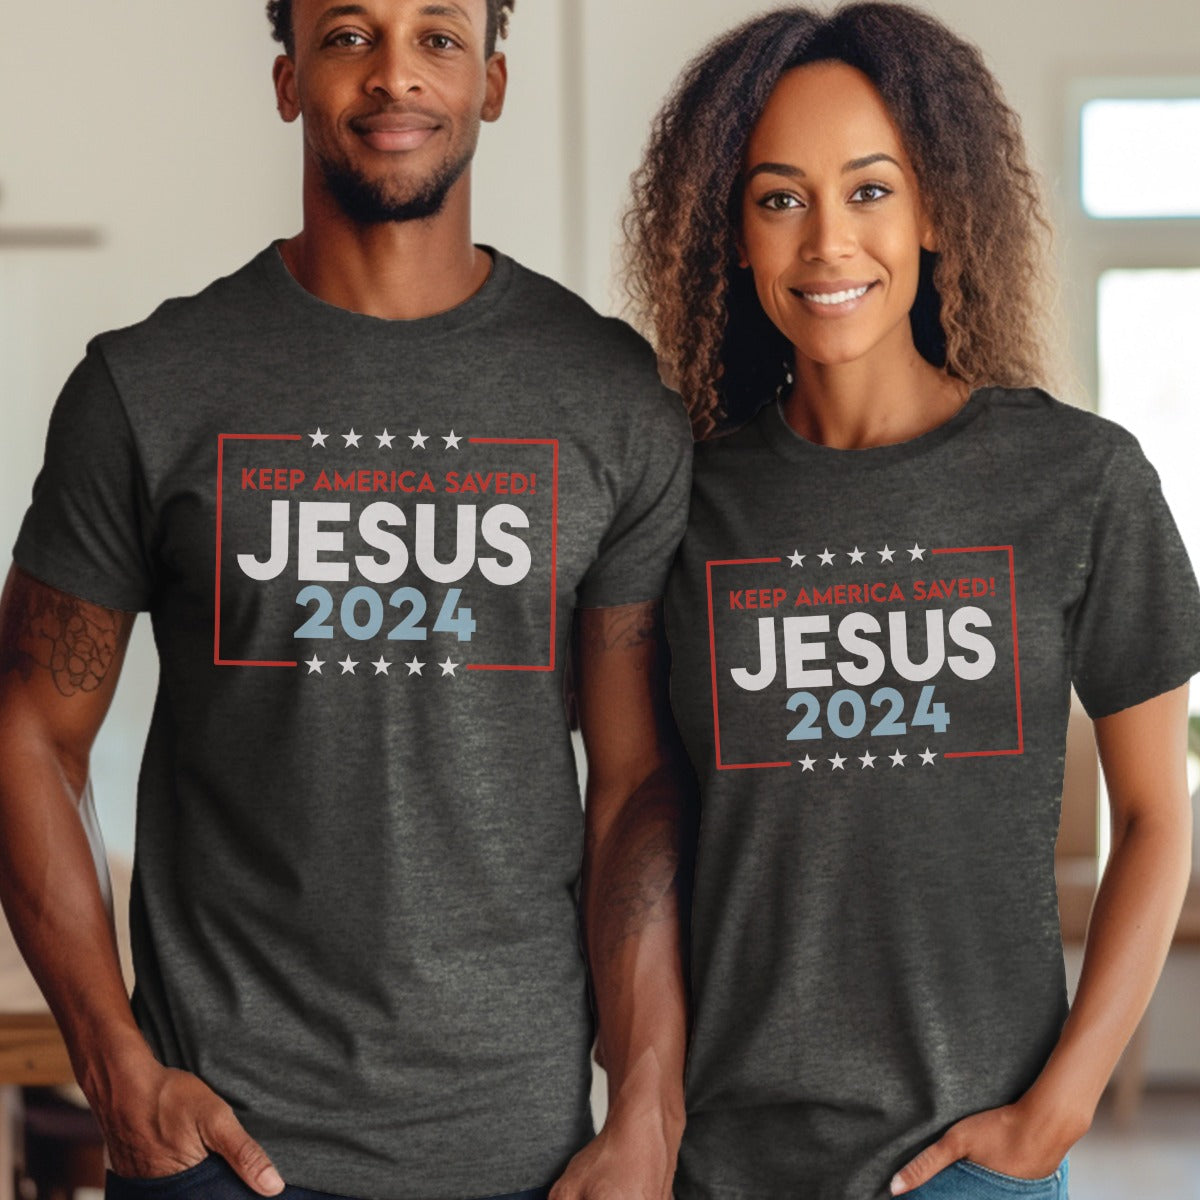 Patriotic married couple wearing heather dark gray Bella Canvas 3001 Presidential election vote unisex Christian t-shirts with "Jesus 2024 Keep America Saved" printed in bold red, white, and blue fonts, made in the USA, made for men and women God & Country Patriots